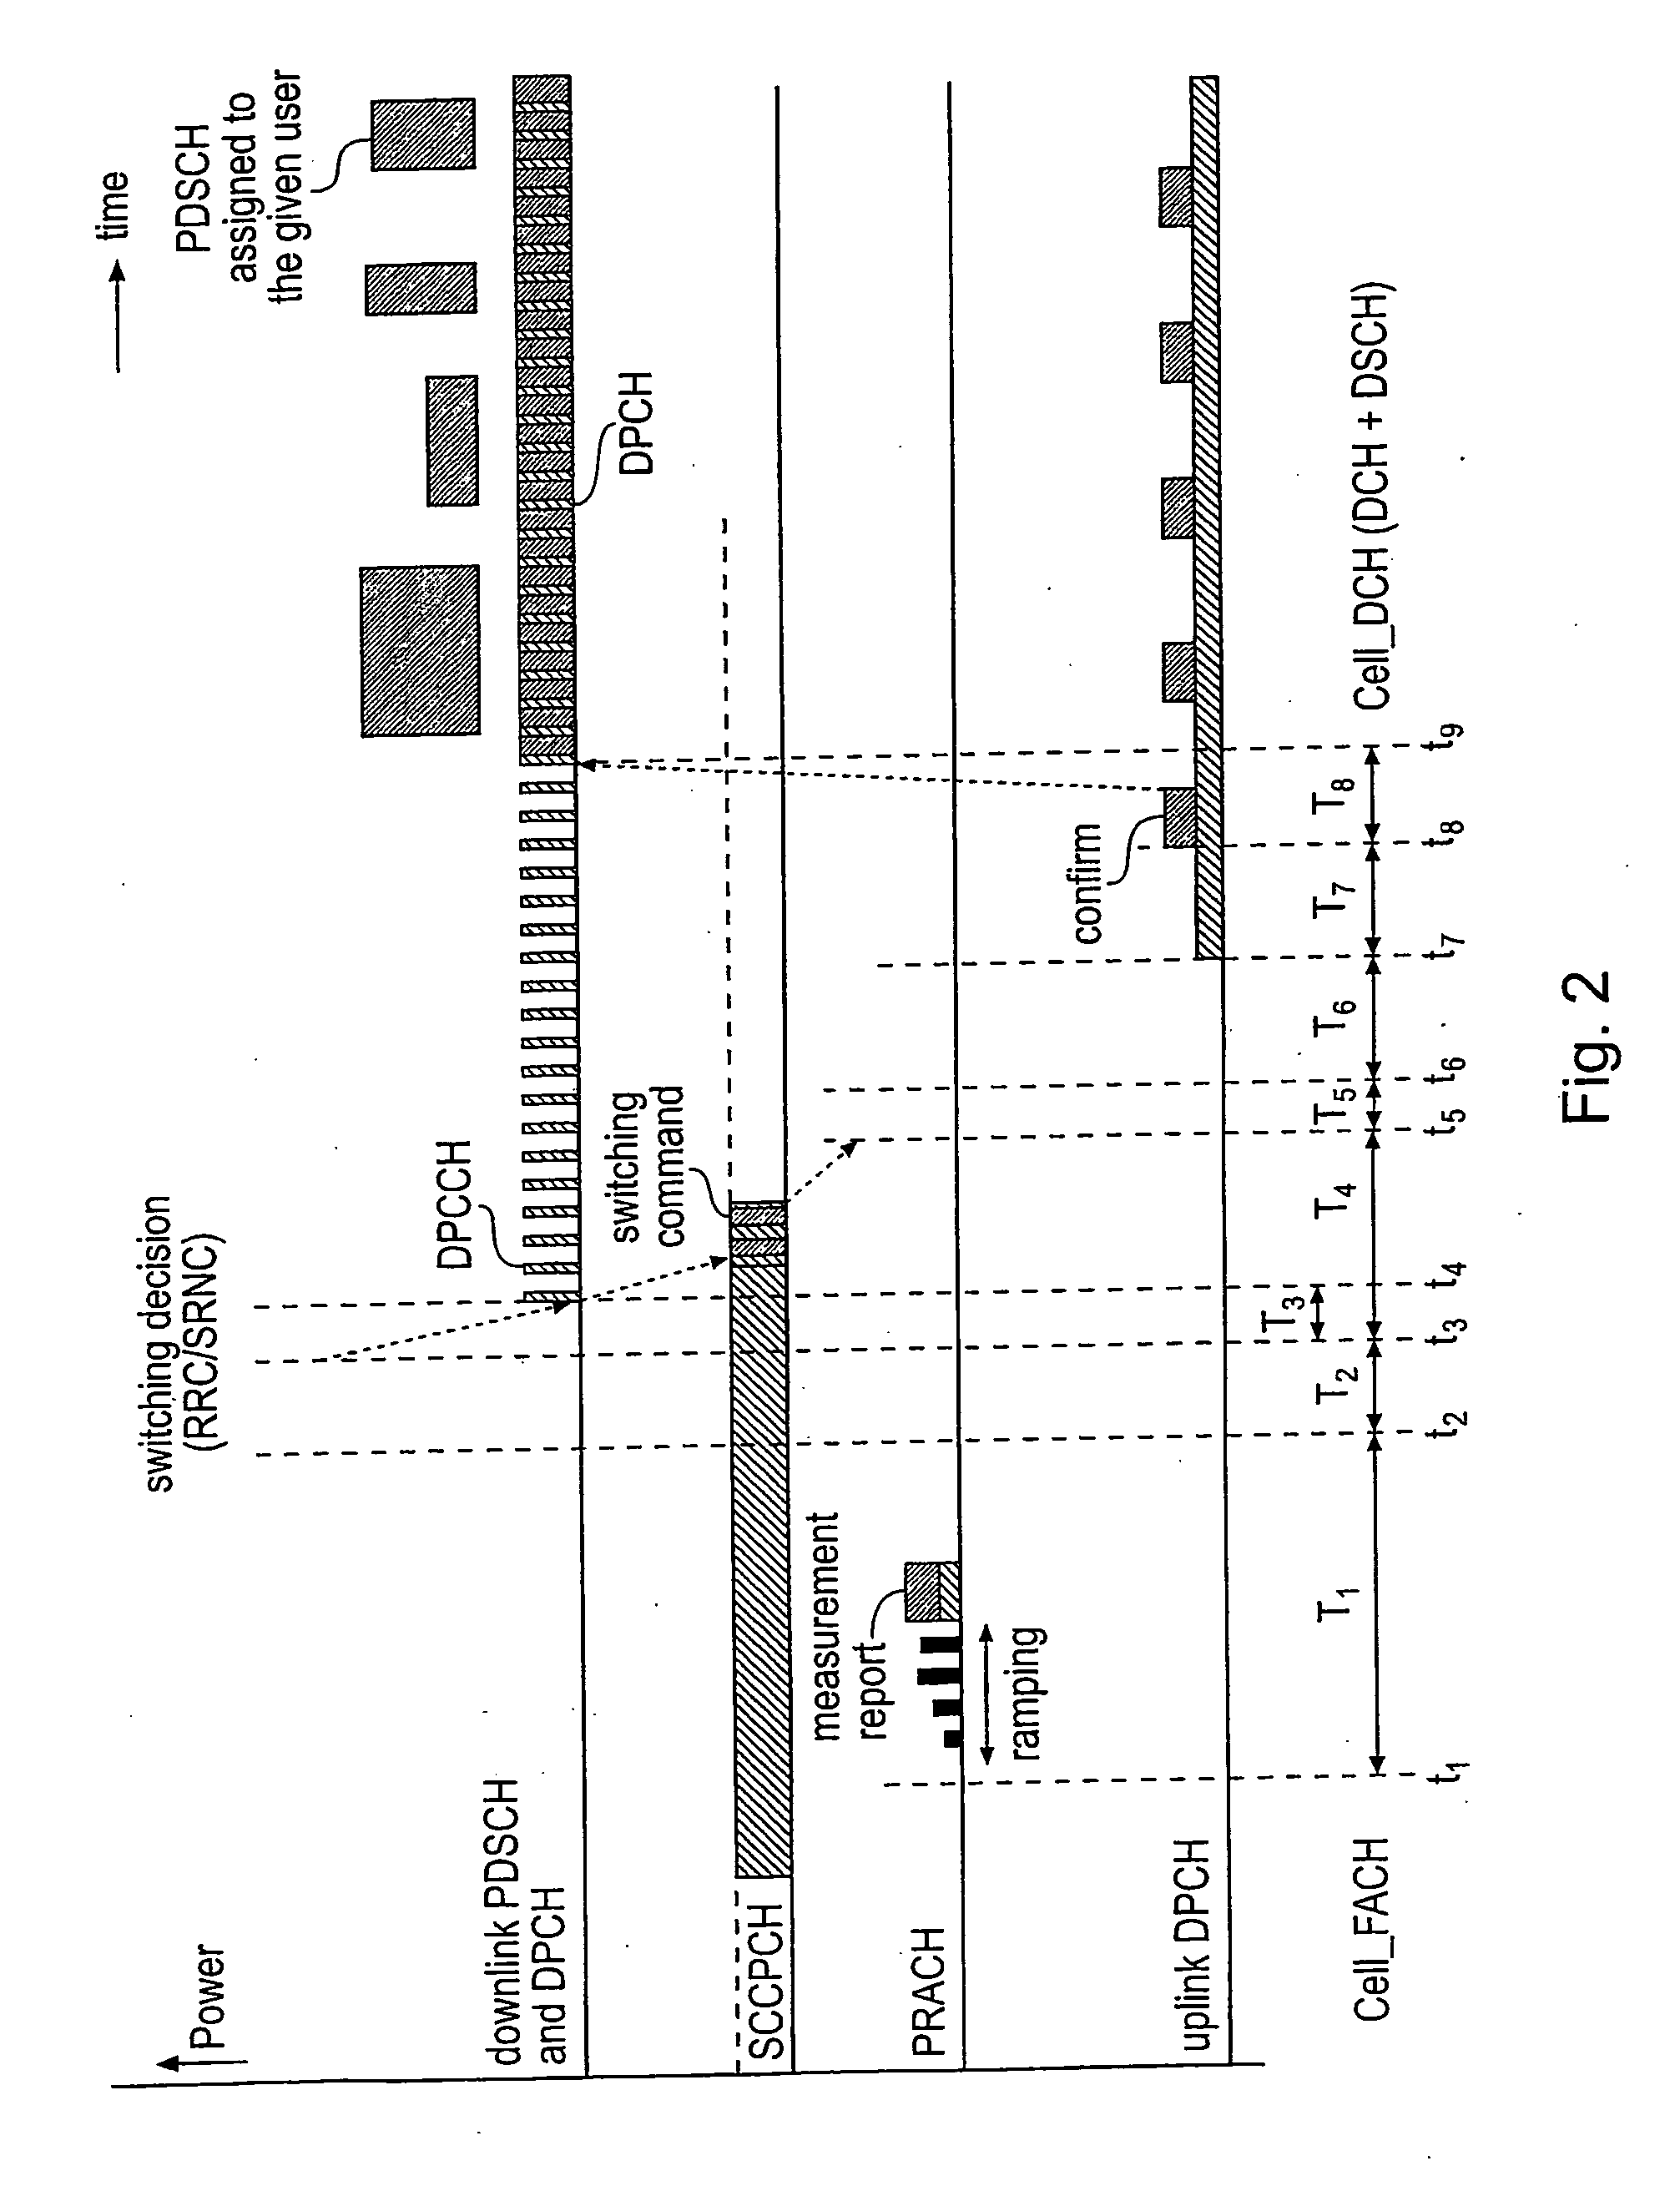 Method for establishing a radio channel in a wireless cdma network wherein the preamble signal increases in power during transmission